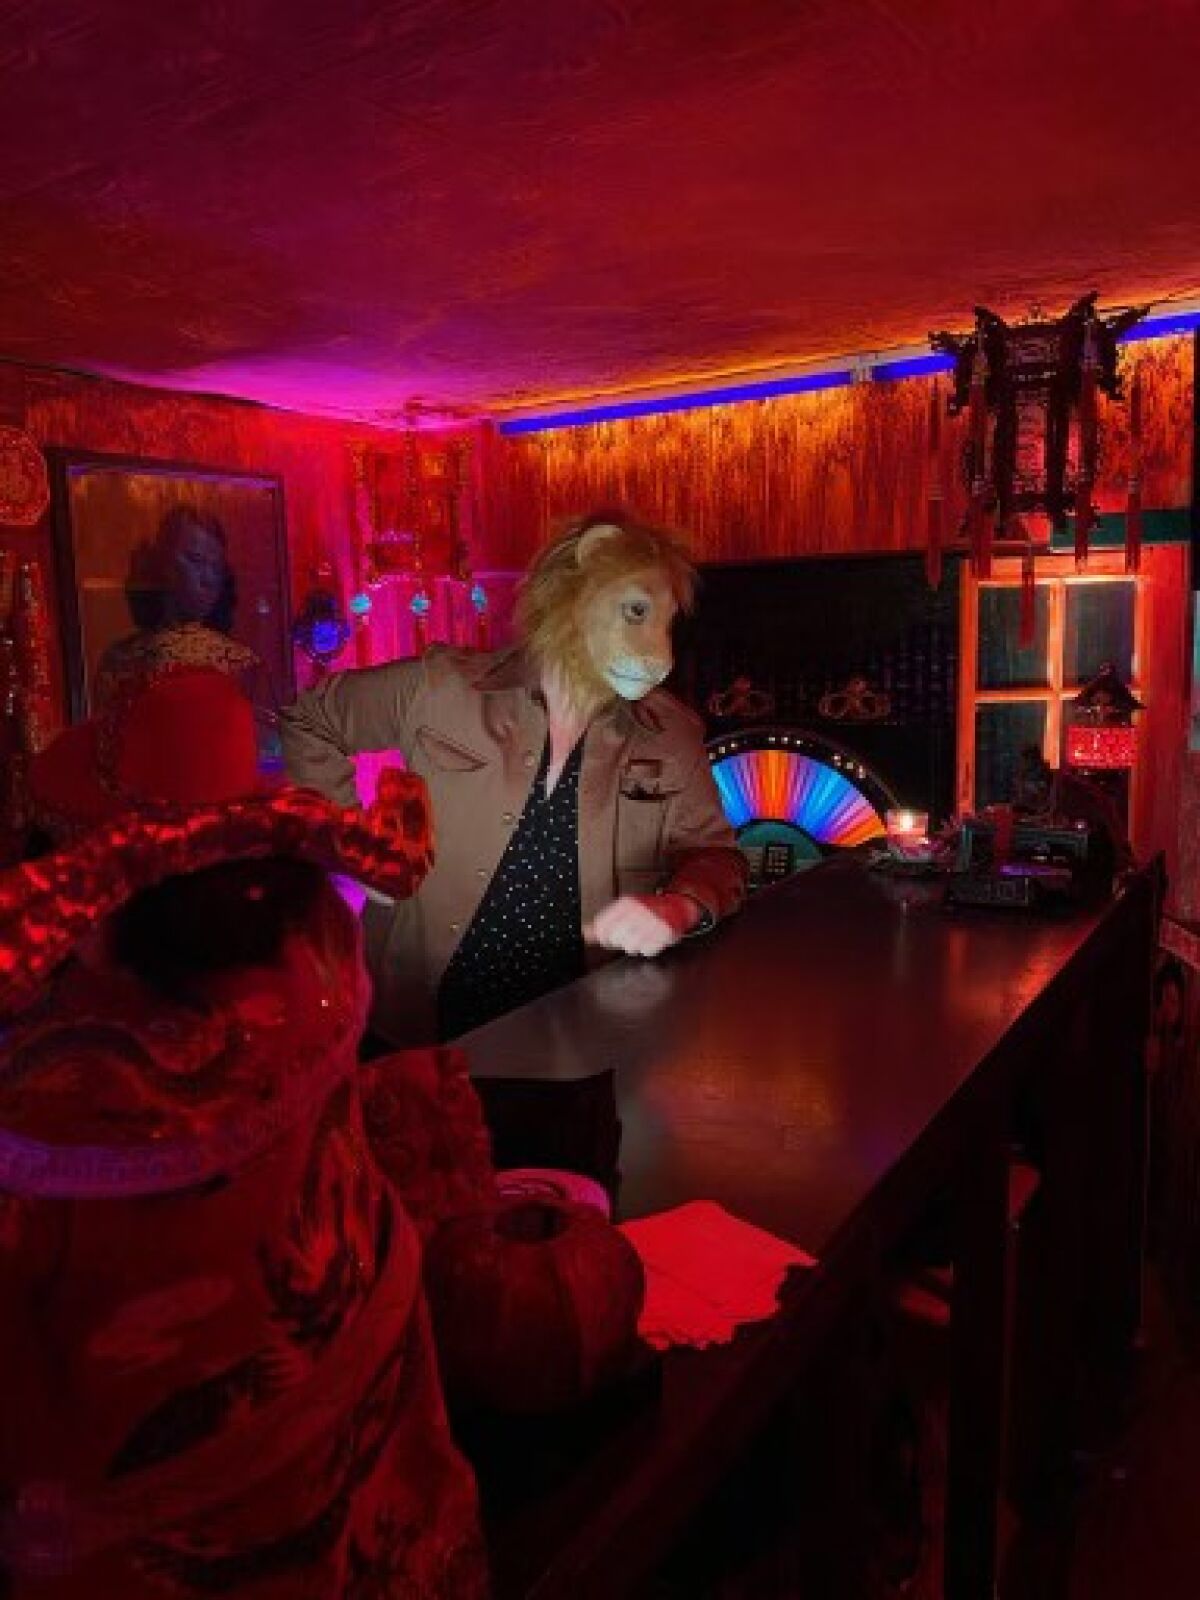 A guy wearing a lion-head mask stands at the bar in a red-lighted club.